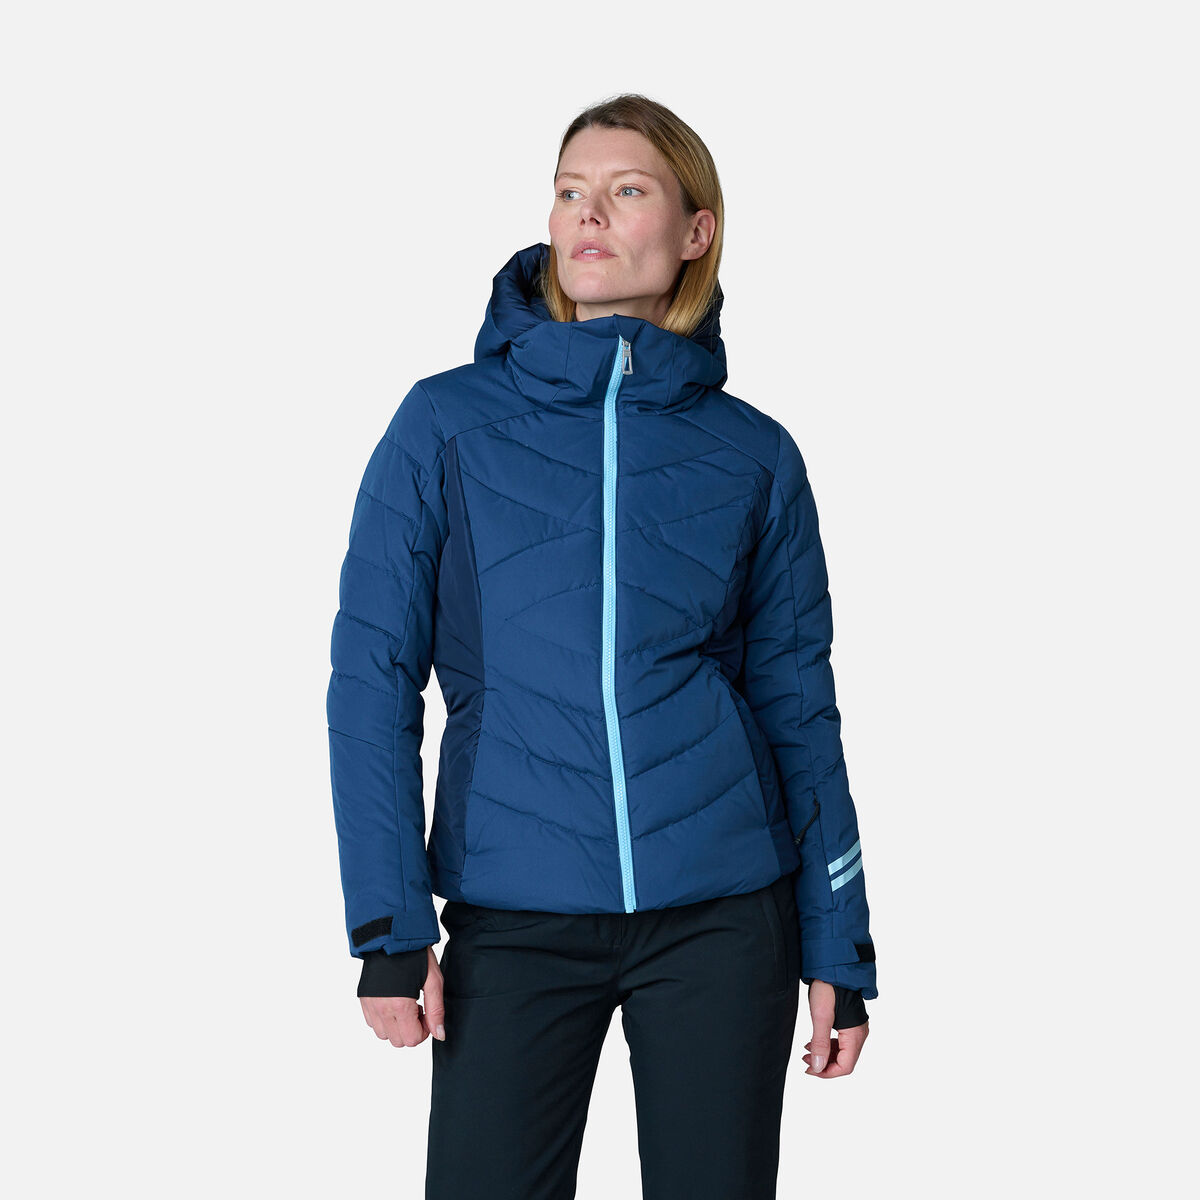 Women's Courbe Ski Jacket | Outlet selection | Rossignol